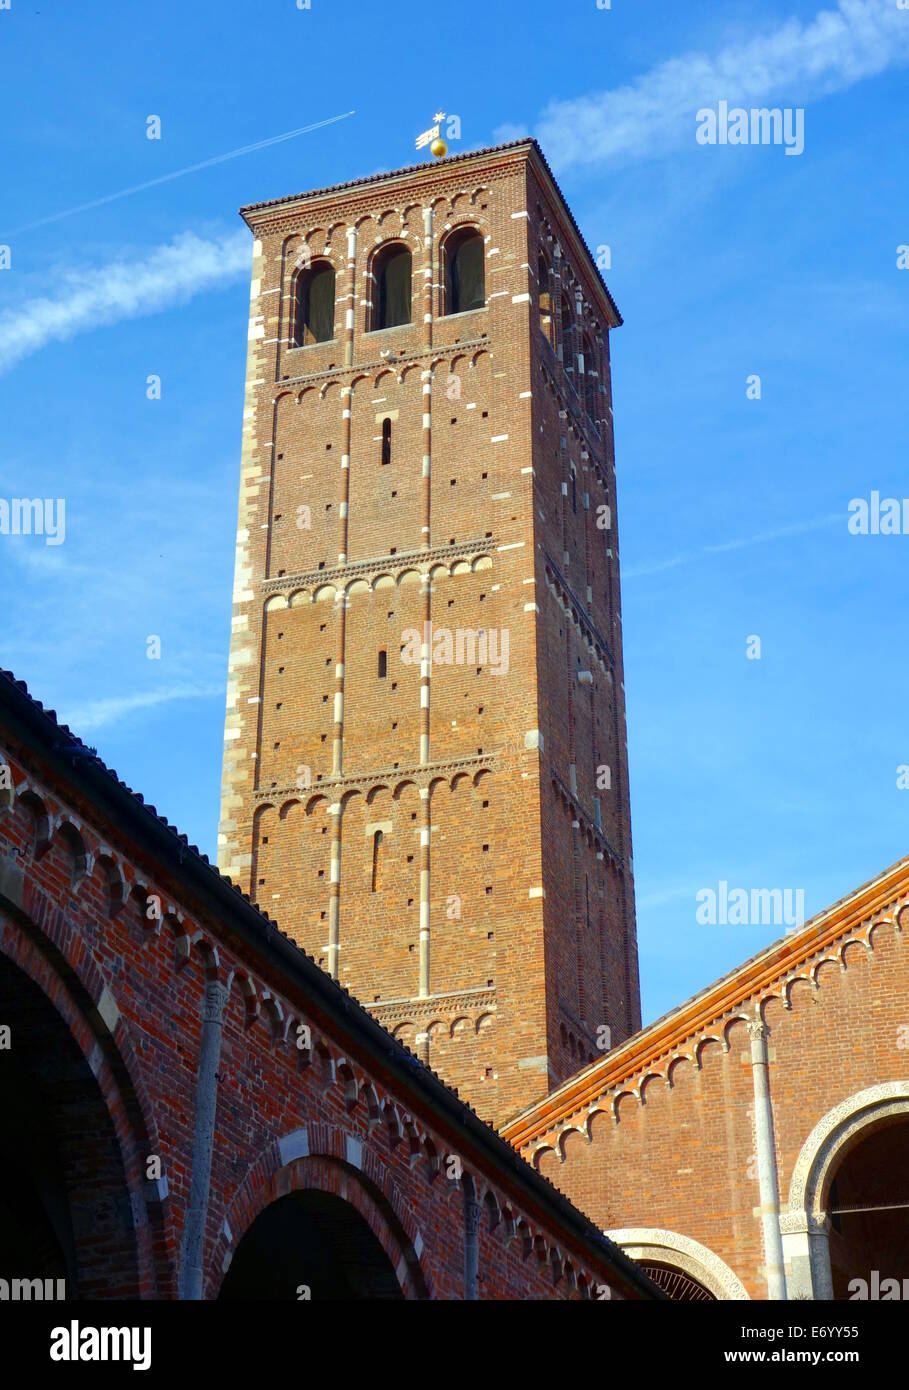 The bell tower of the Basilica di Sant'Ambrogio in Milan, Italy Stock Photo